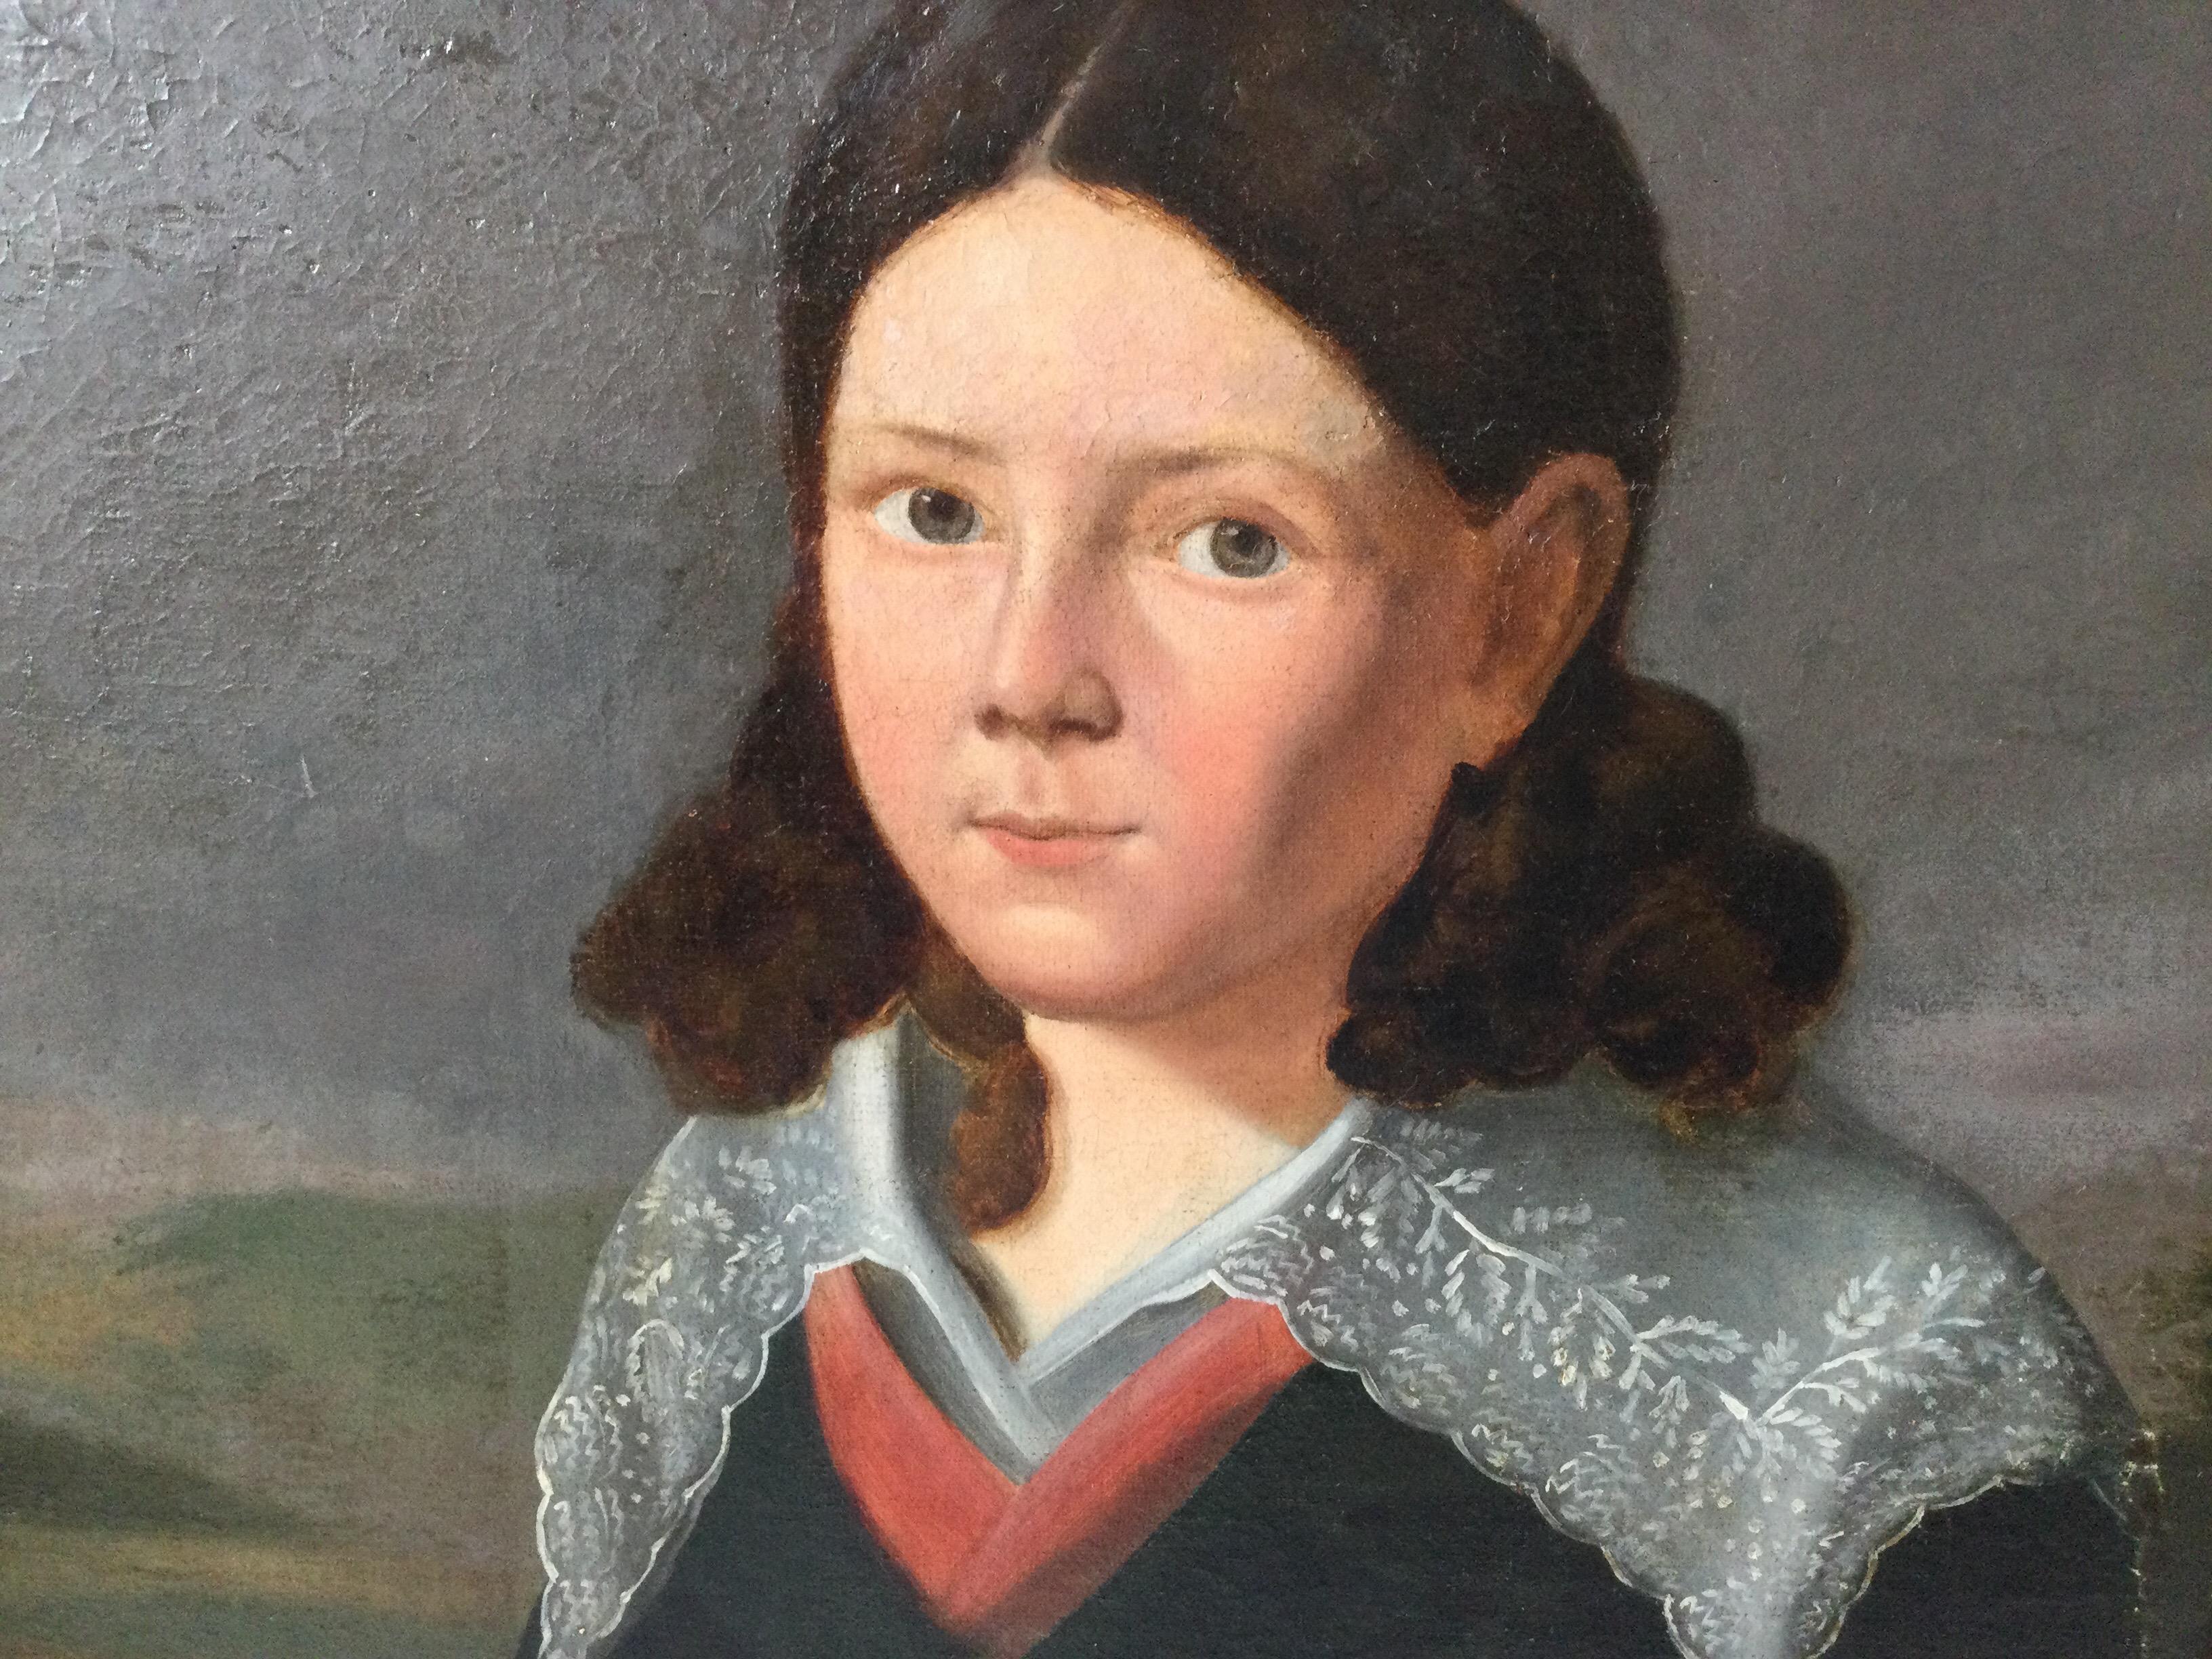 European Oil on Canvas of a Young Bow with Lace Collar